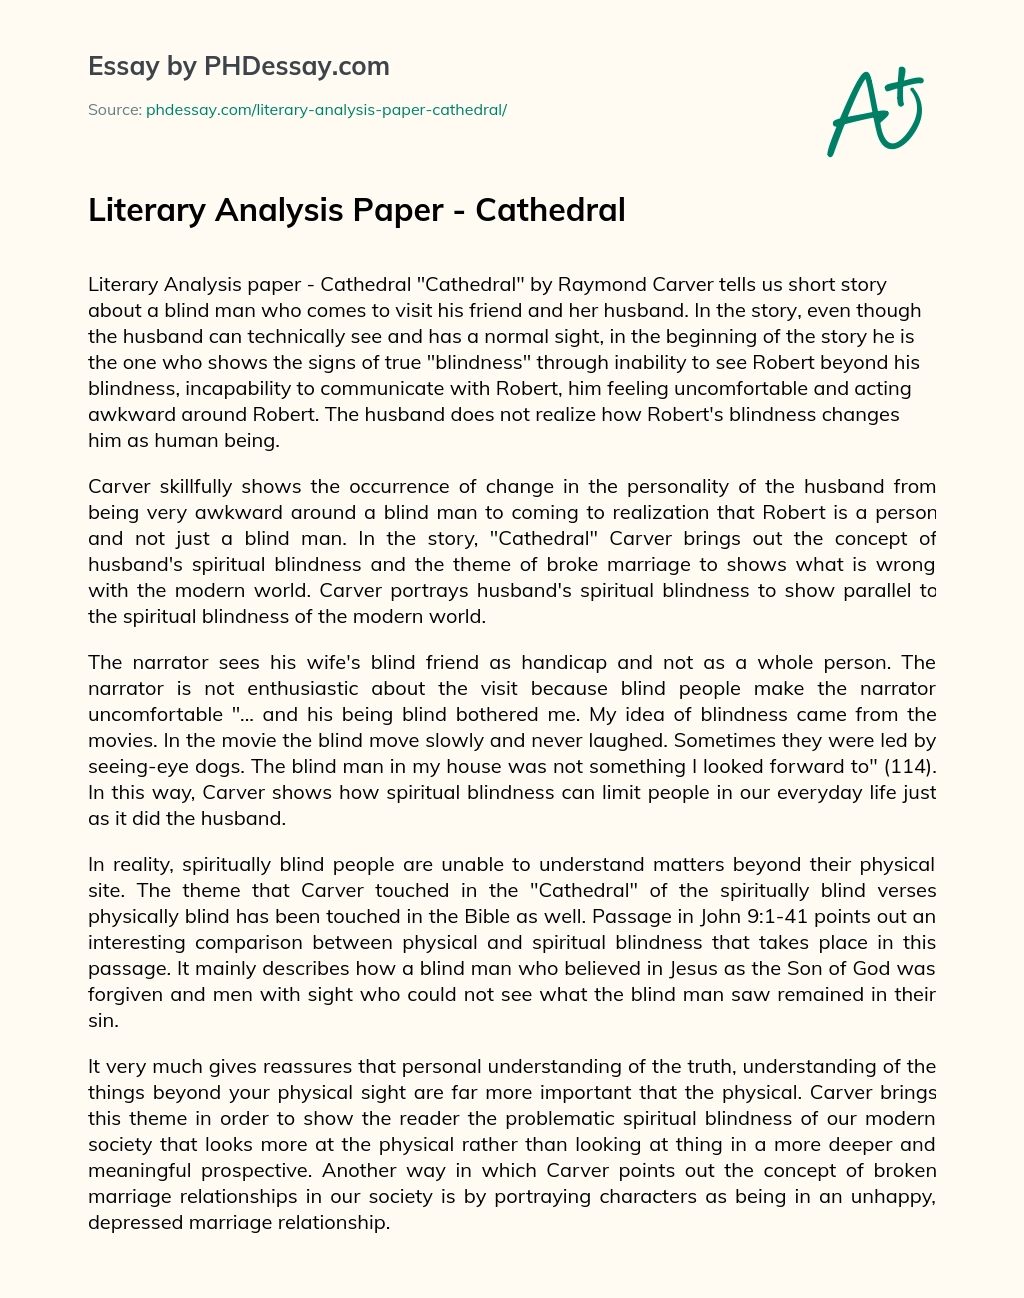 Literary Analysis Paper – Cathedral